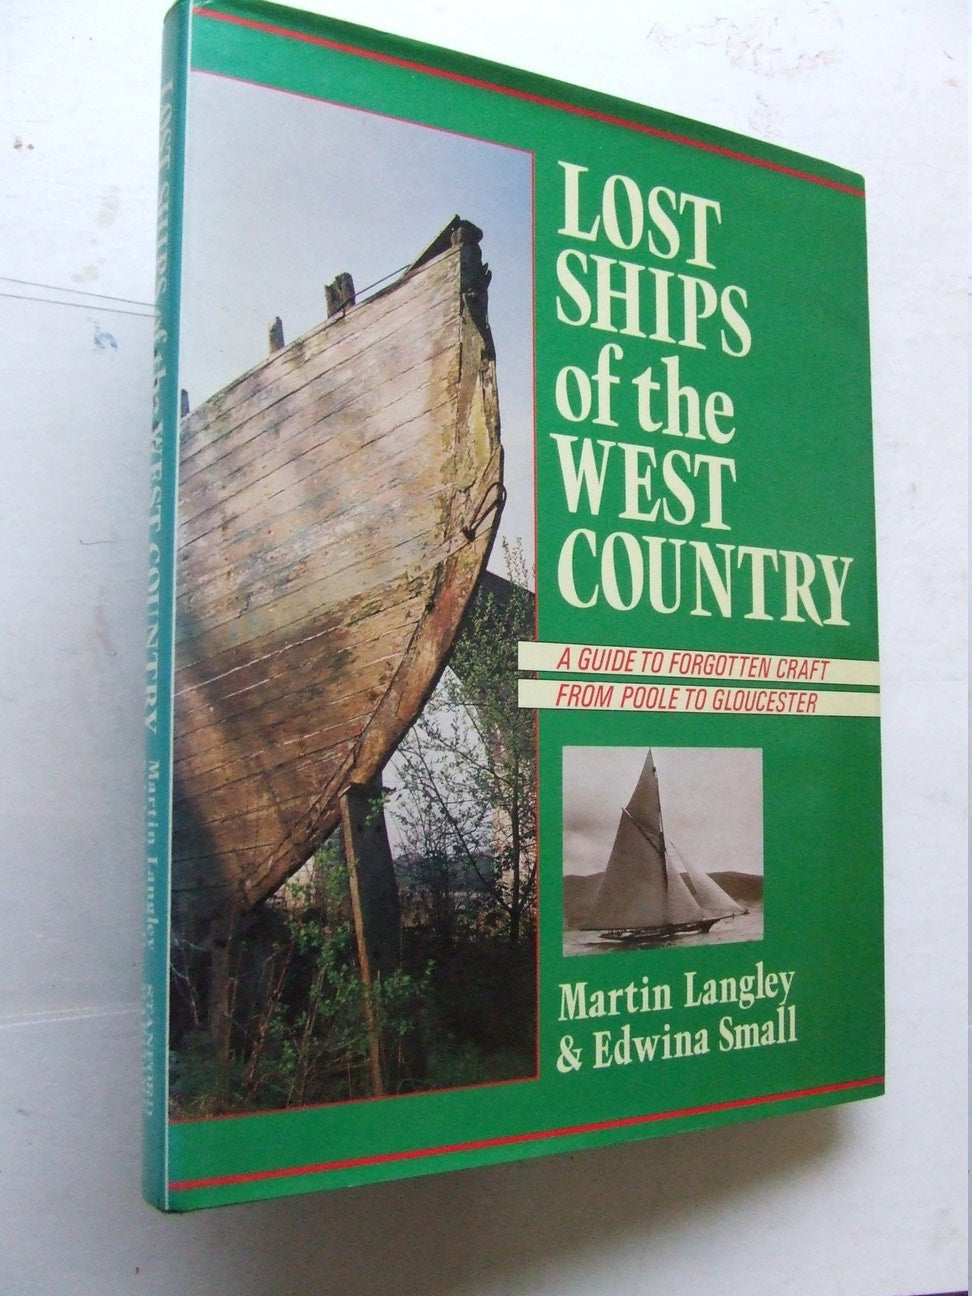 Lost Ships of the West Country, a guide to forgotten craft from Poole to Gloucester